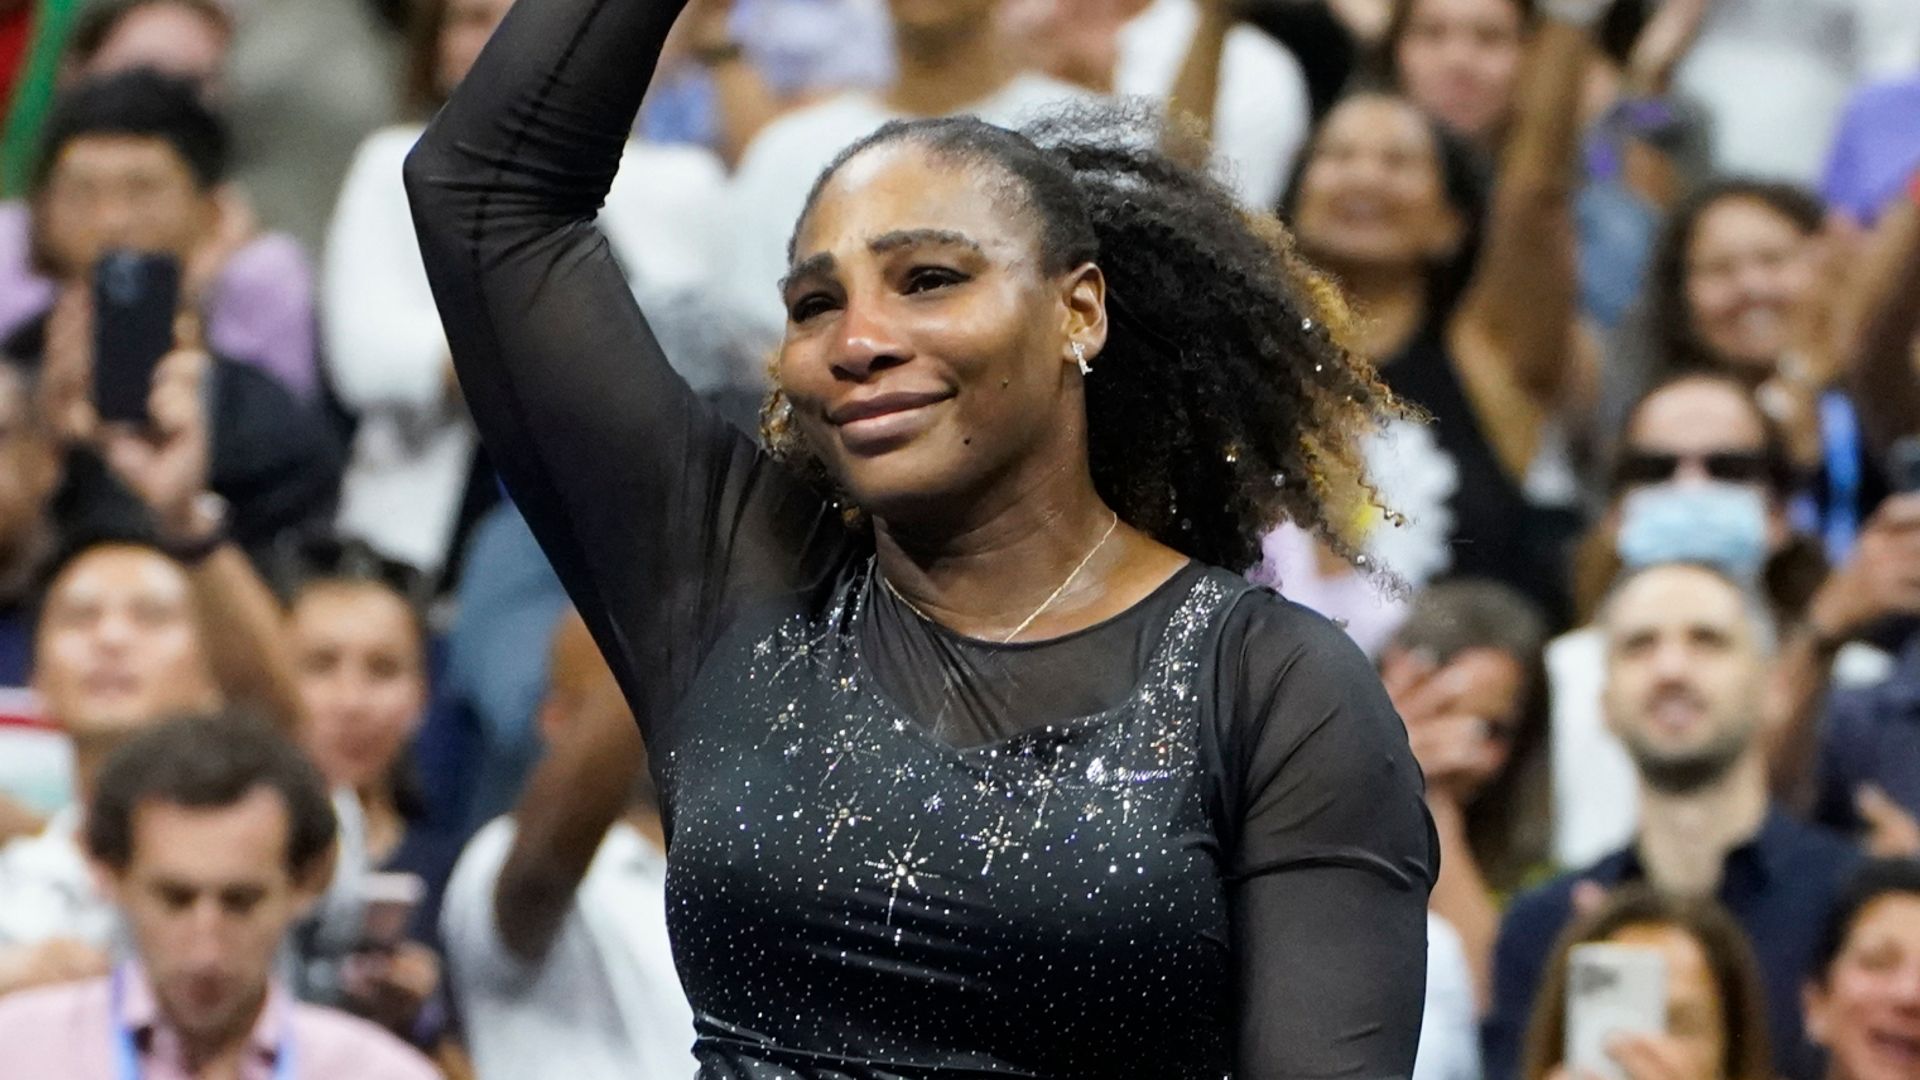 'I am not retired' - Serena's chances of returning to tennis 'very high'